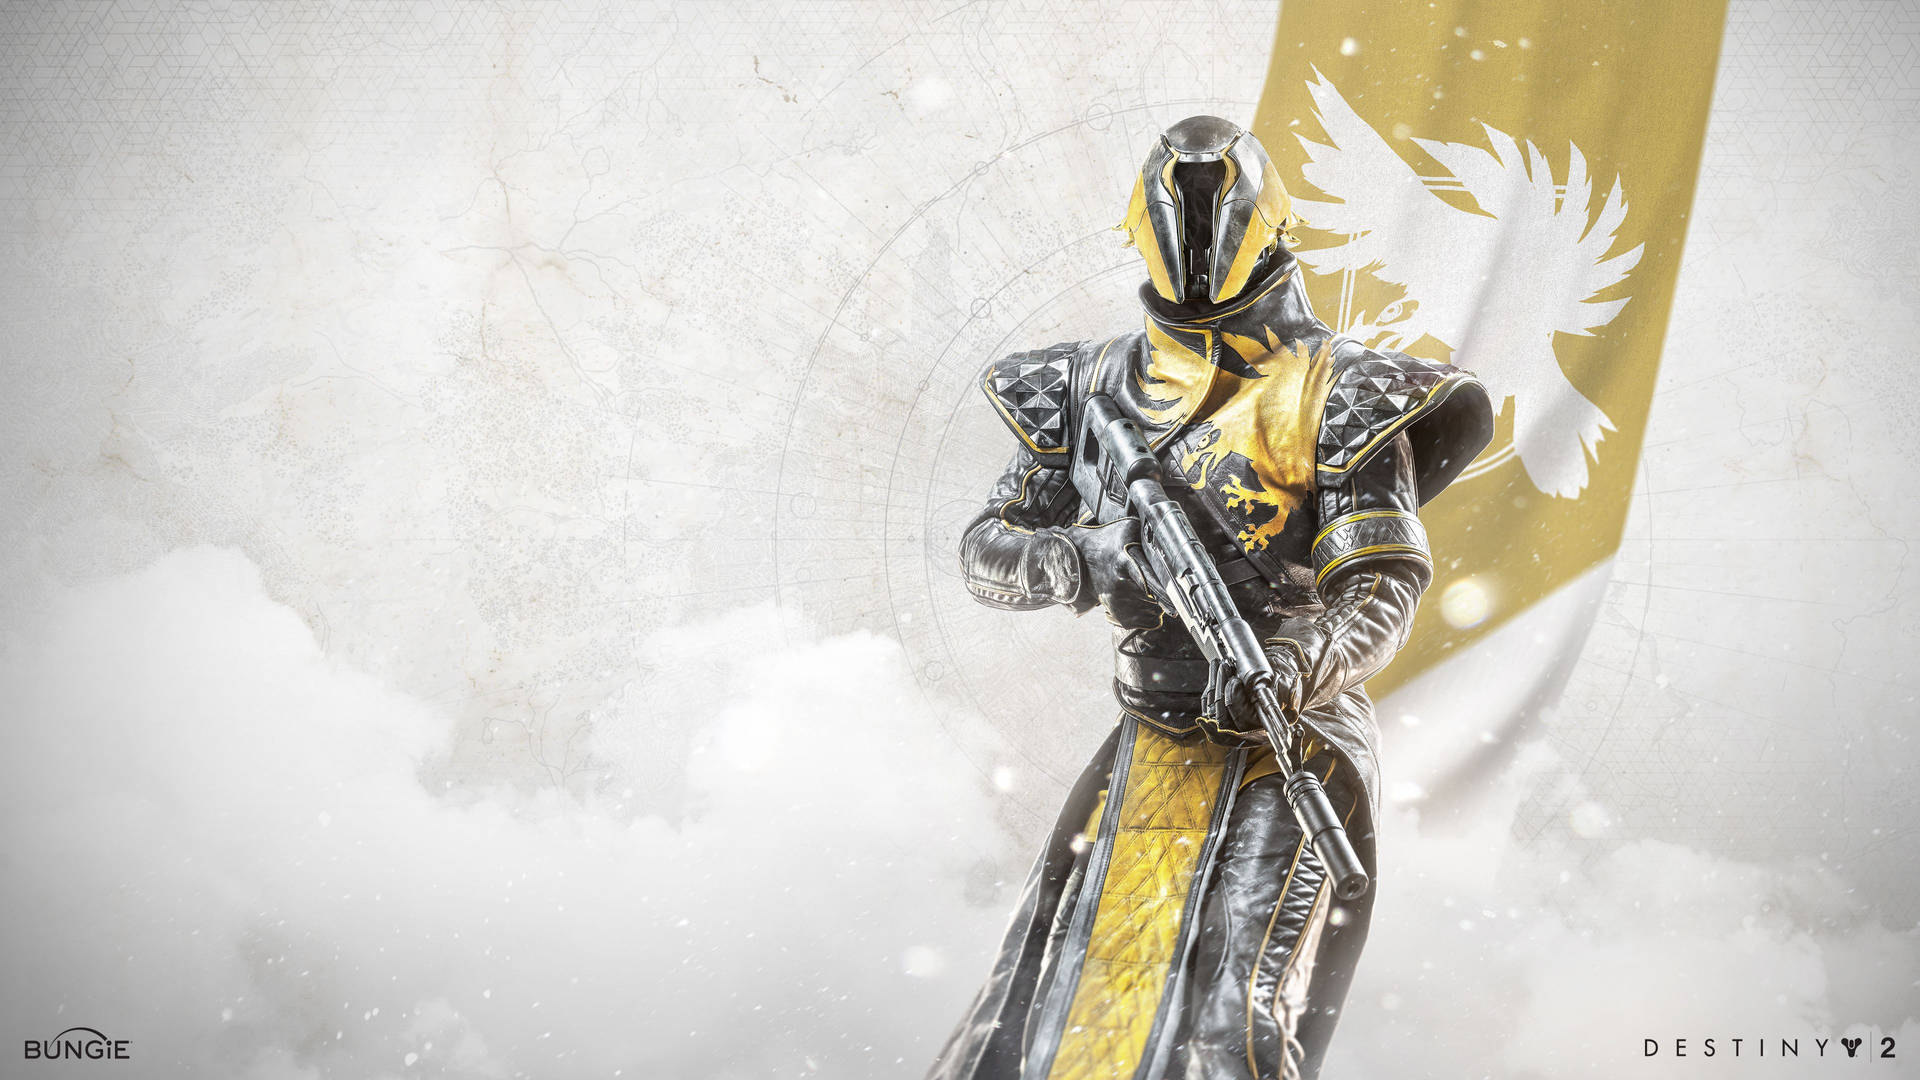 Experience all the power and beauty of the Stormcaller Warlock in Destiny 2 Wallpaper